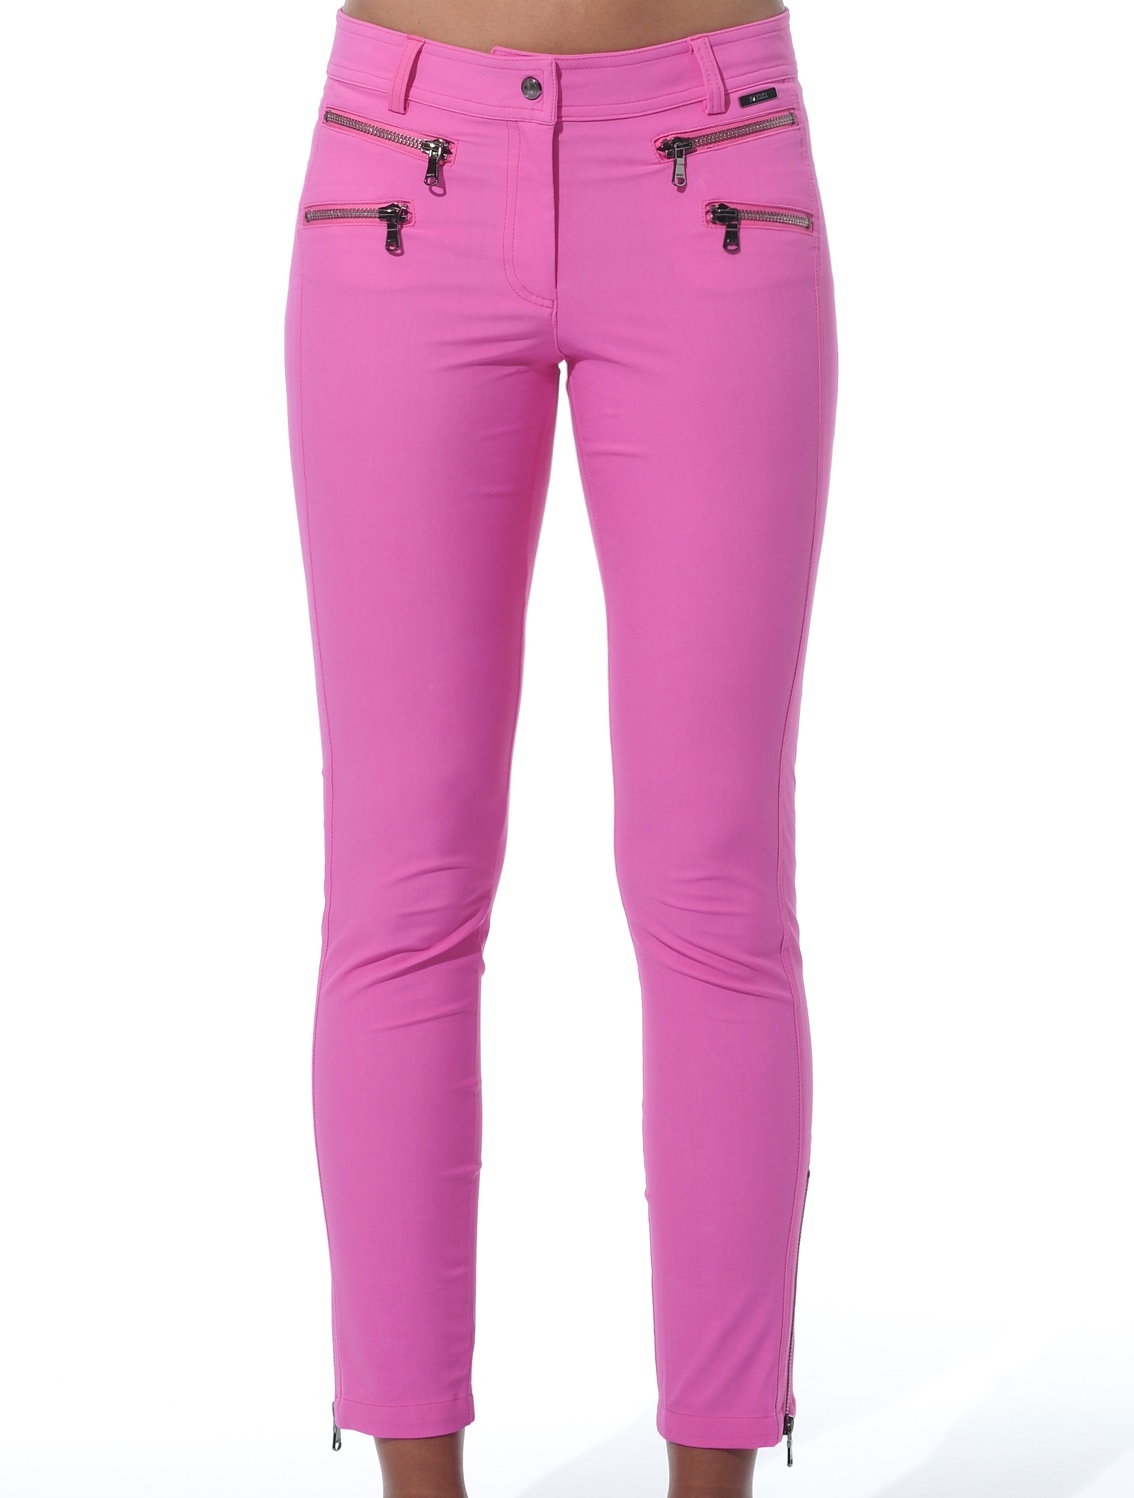 4way stretch double zip ankle pants fuchsia 